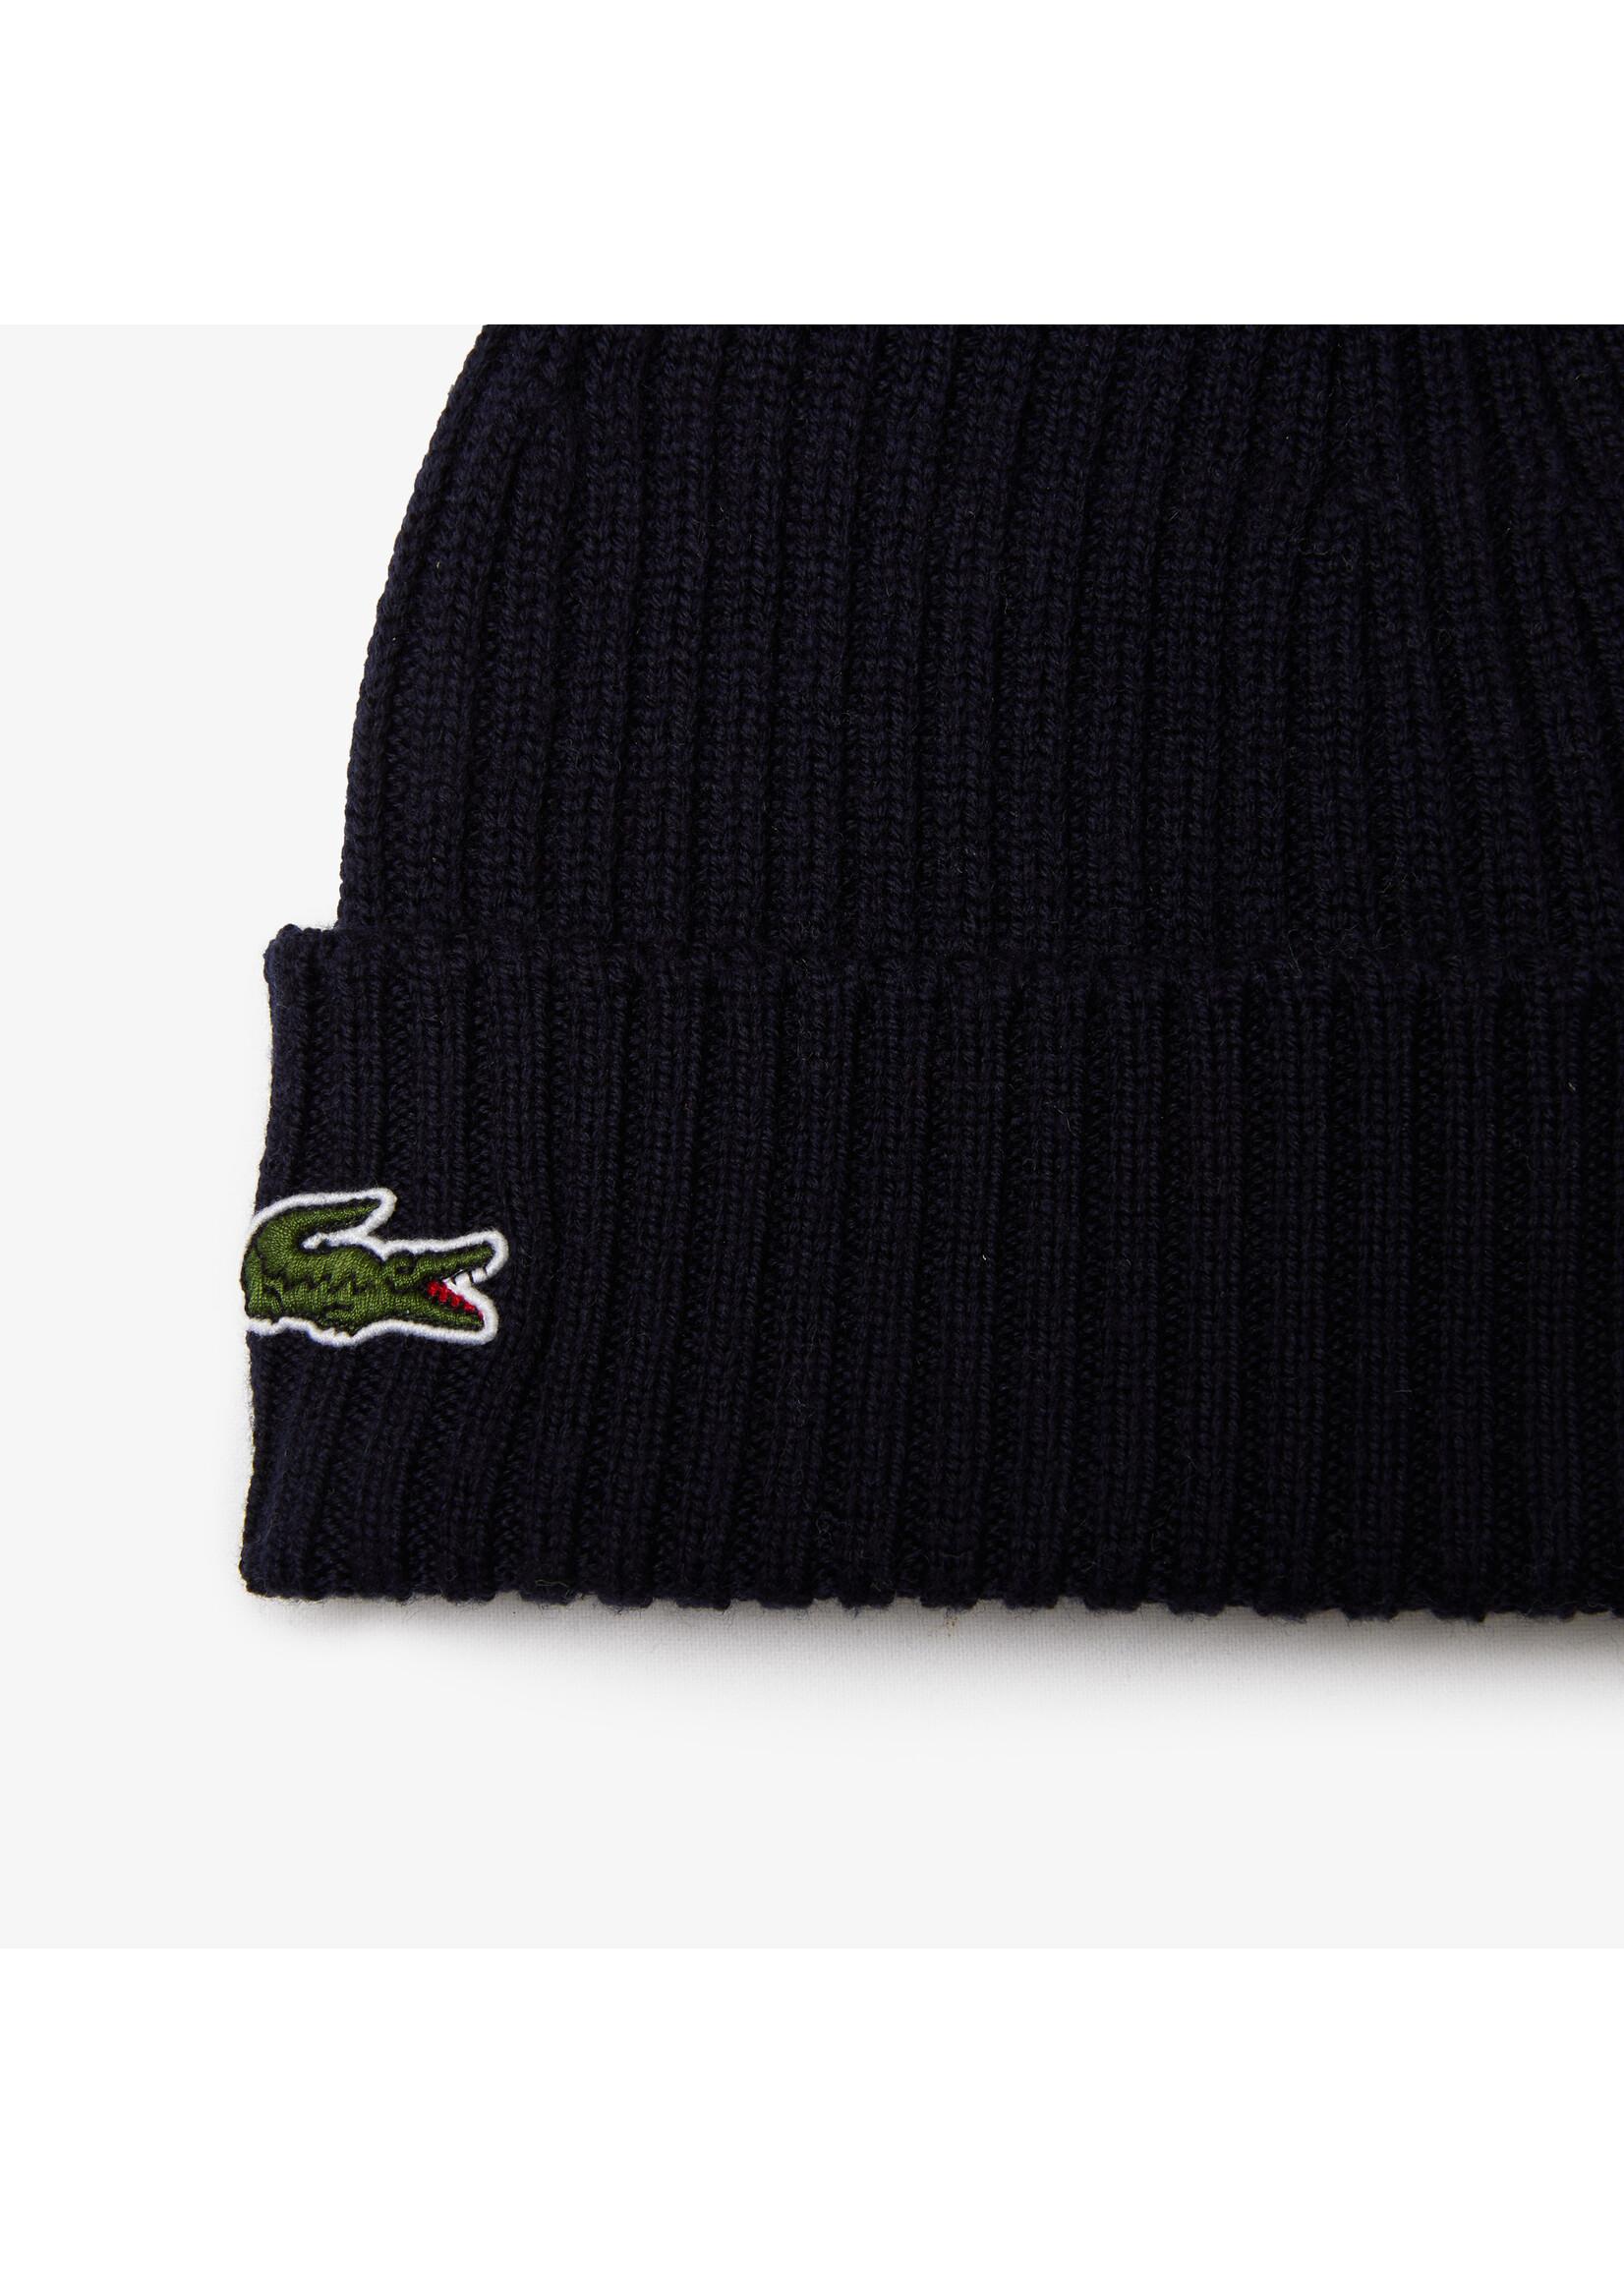 LACOSTE Unisex Ribbed Wool Beanie